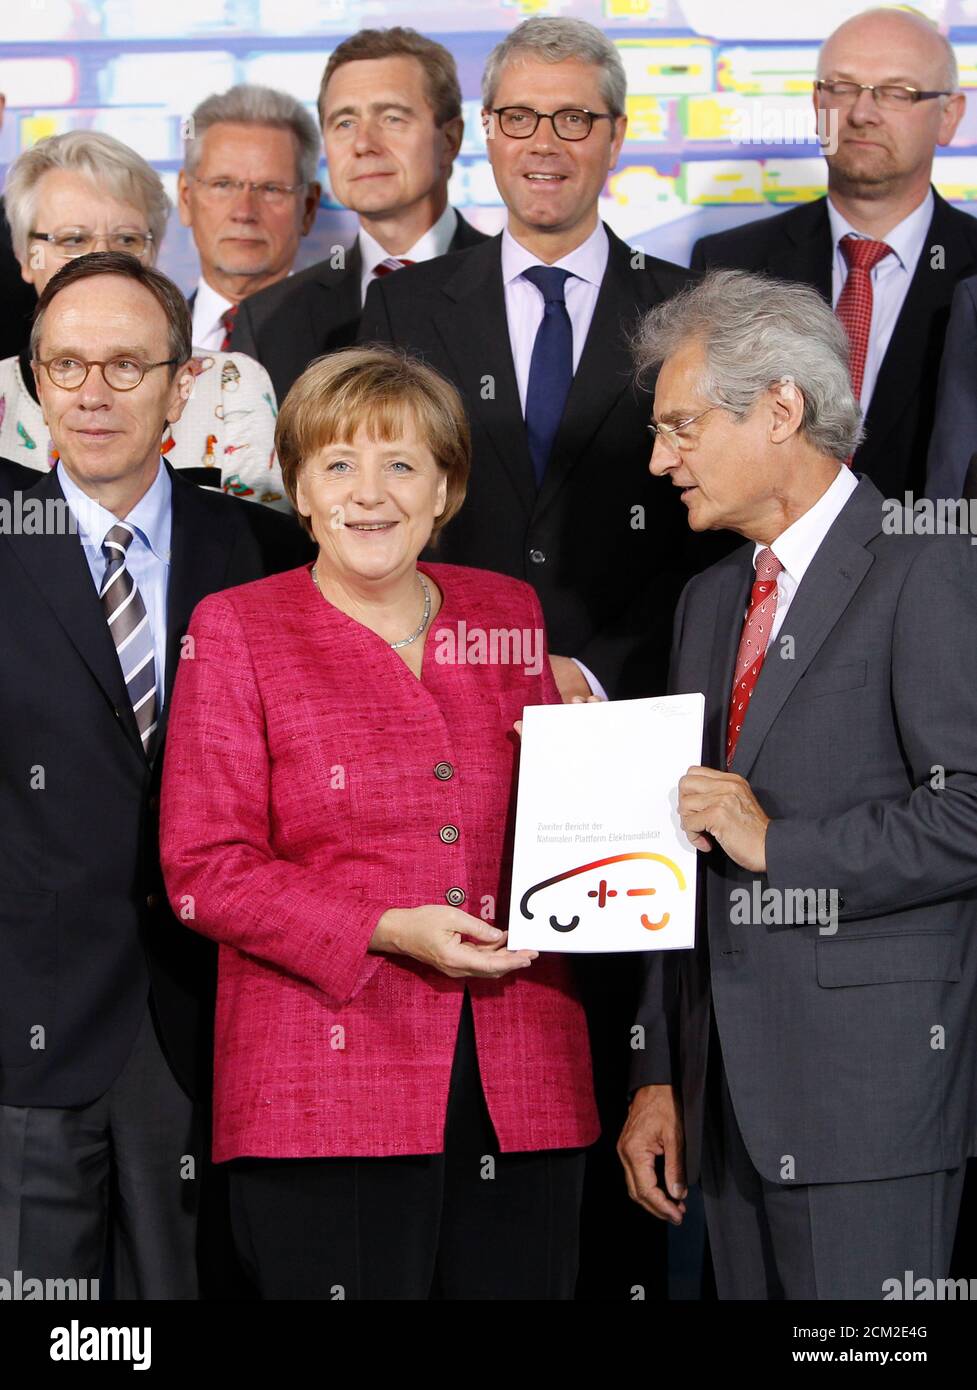 The head of the German Academy of Science Henning Kagermann (first row R) hands over the Second National Electromobility Report to German Chancellor Angela Merkel (first row R) at the Chancellery in Berlin May 16, 2011.  Also pictured are the head of the German Automobile Industry Association (VDA) Mattias Wissmann (first row L) and Environment Minister Norbert Roettgen (second row 2nd R) .   REUTERS/Thomas Peter (GERMANY - Tags: POLITICS) Stock Photo